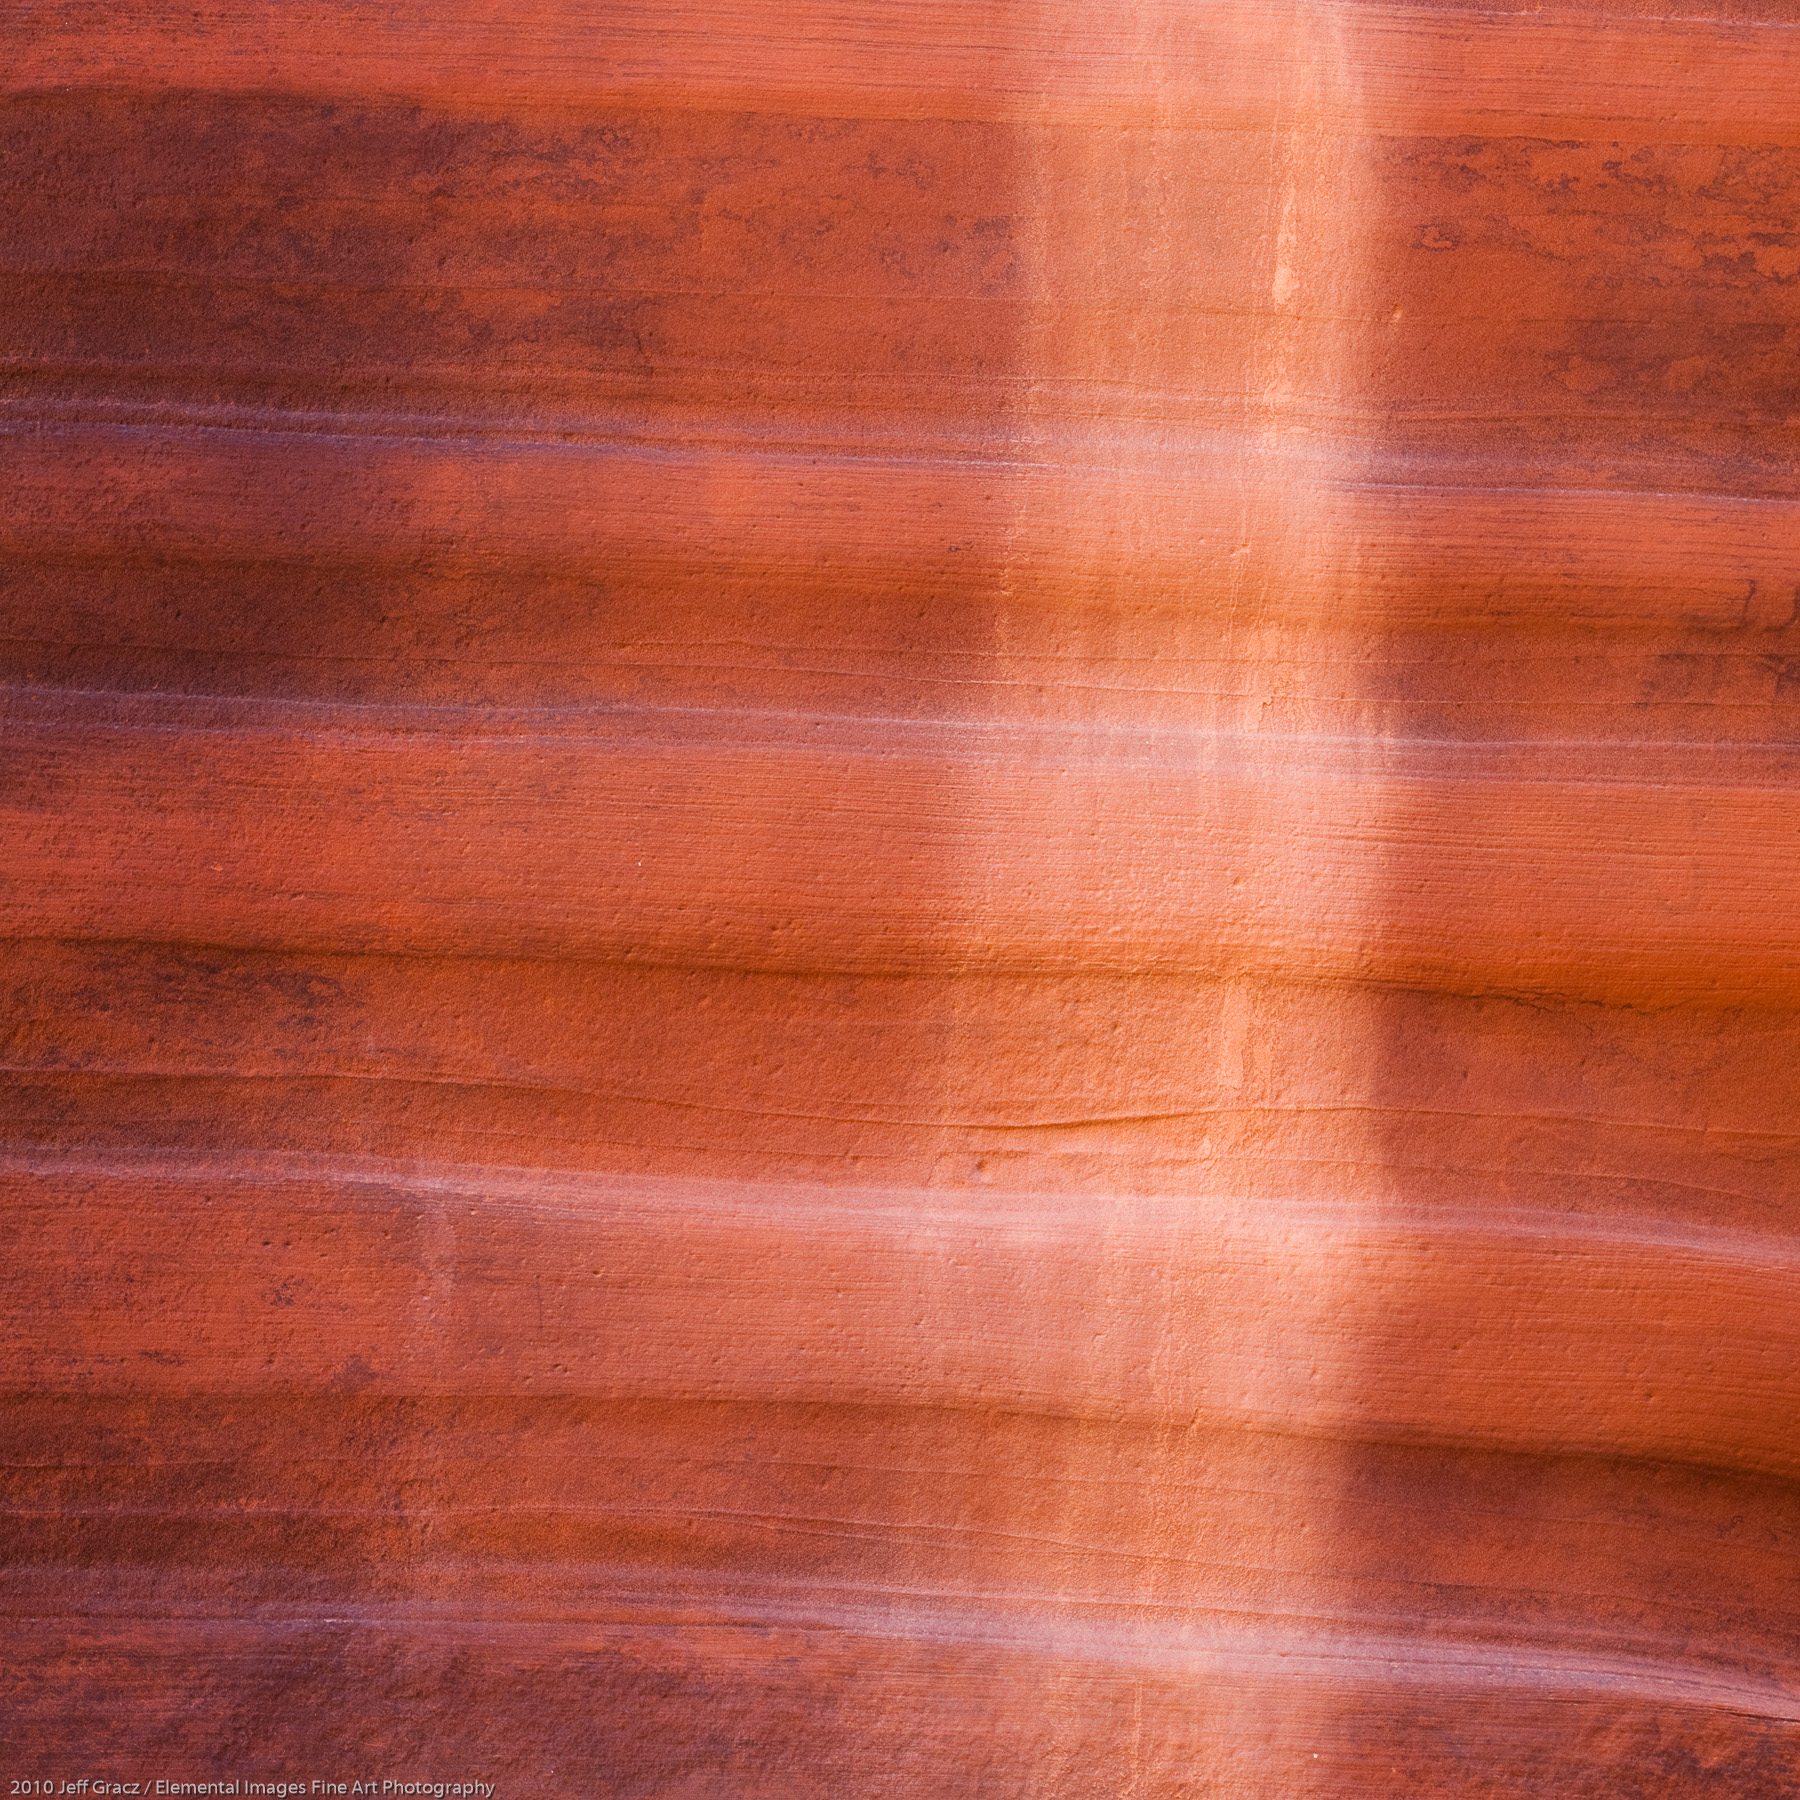 Canyon Wall Abstract I | Paria Canyon / Vermillion Cliffs Wilderness | AZ | USA - © 2010 Jeff Gracz / Elemental Images Fine Art Photography - All Rights Reserved Worldwide